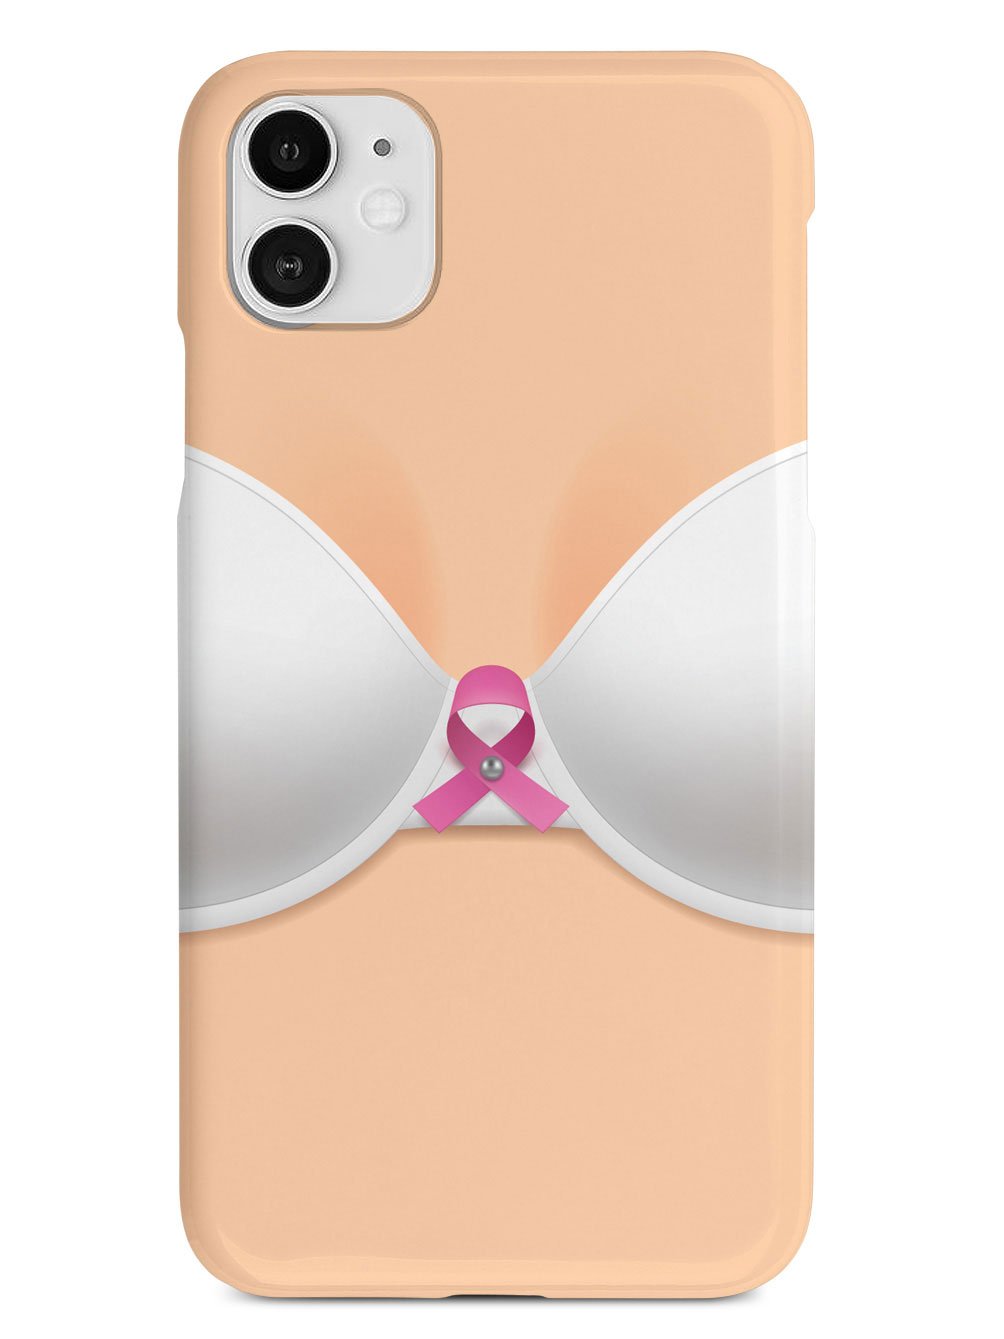 White Bra with Pink Ribbon - Breast Cancer Awareness Case